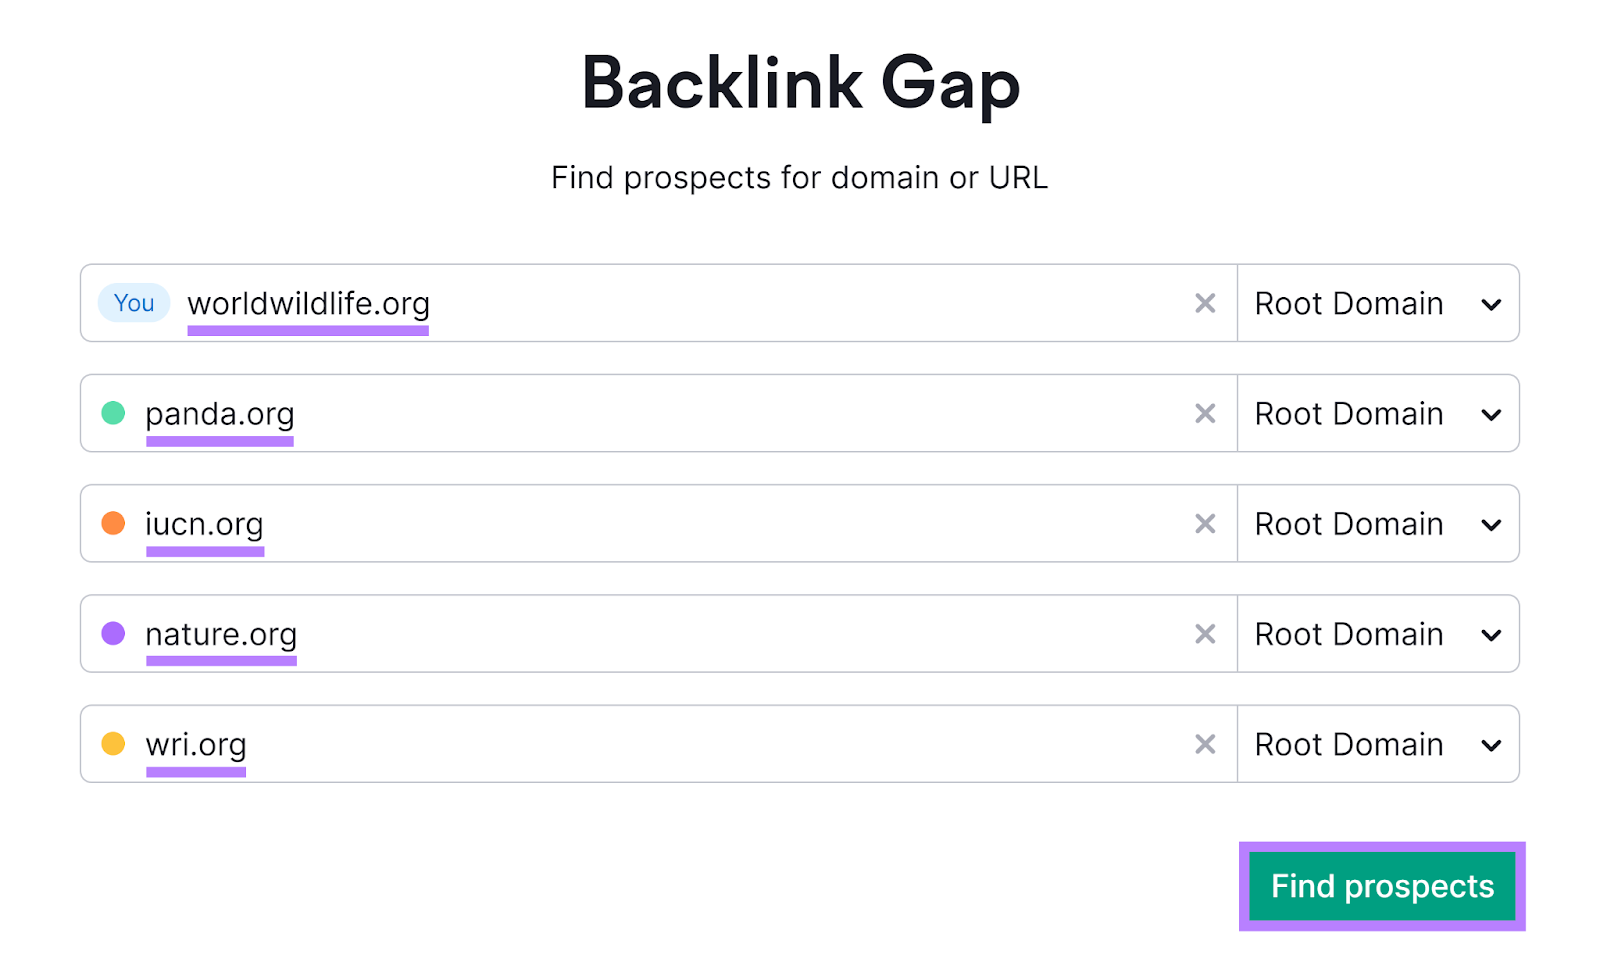 Semrush Backlink Gap tool start with domains entered and "Find prospects" button highlighted